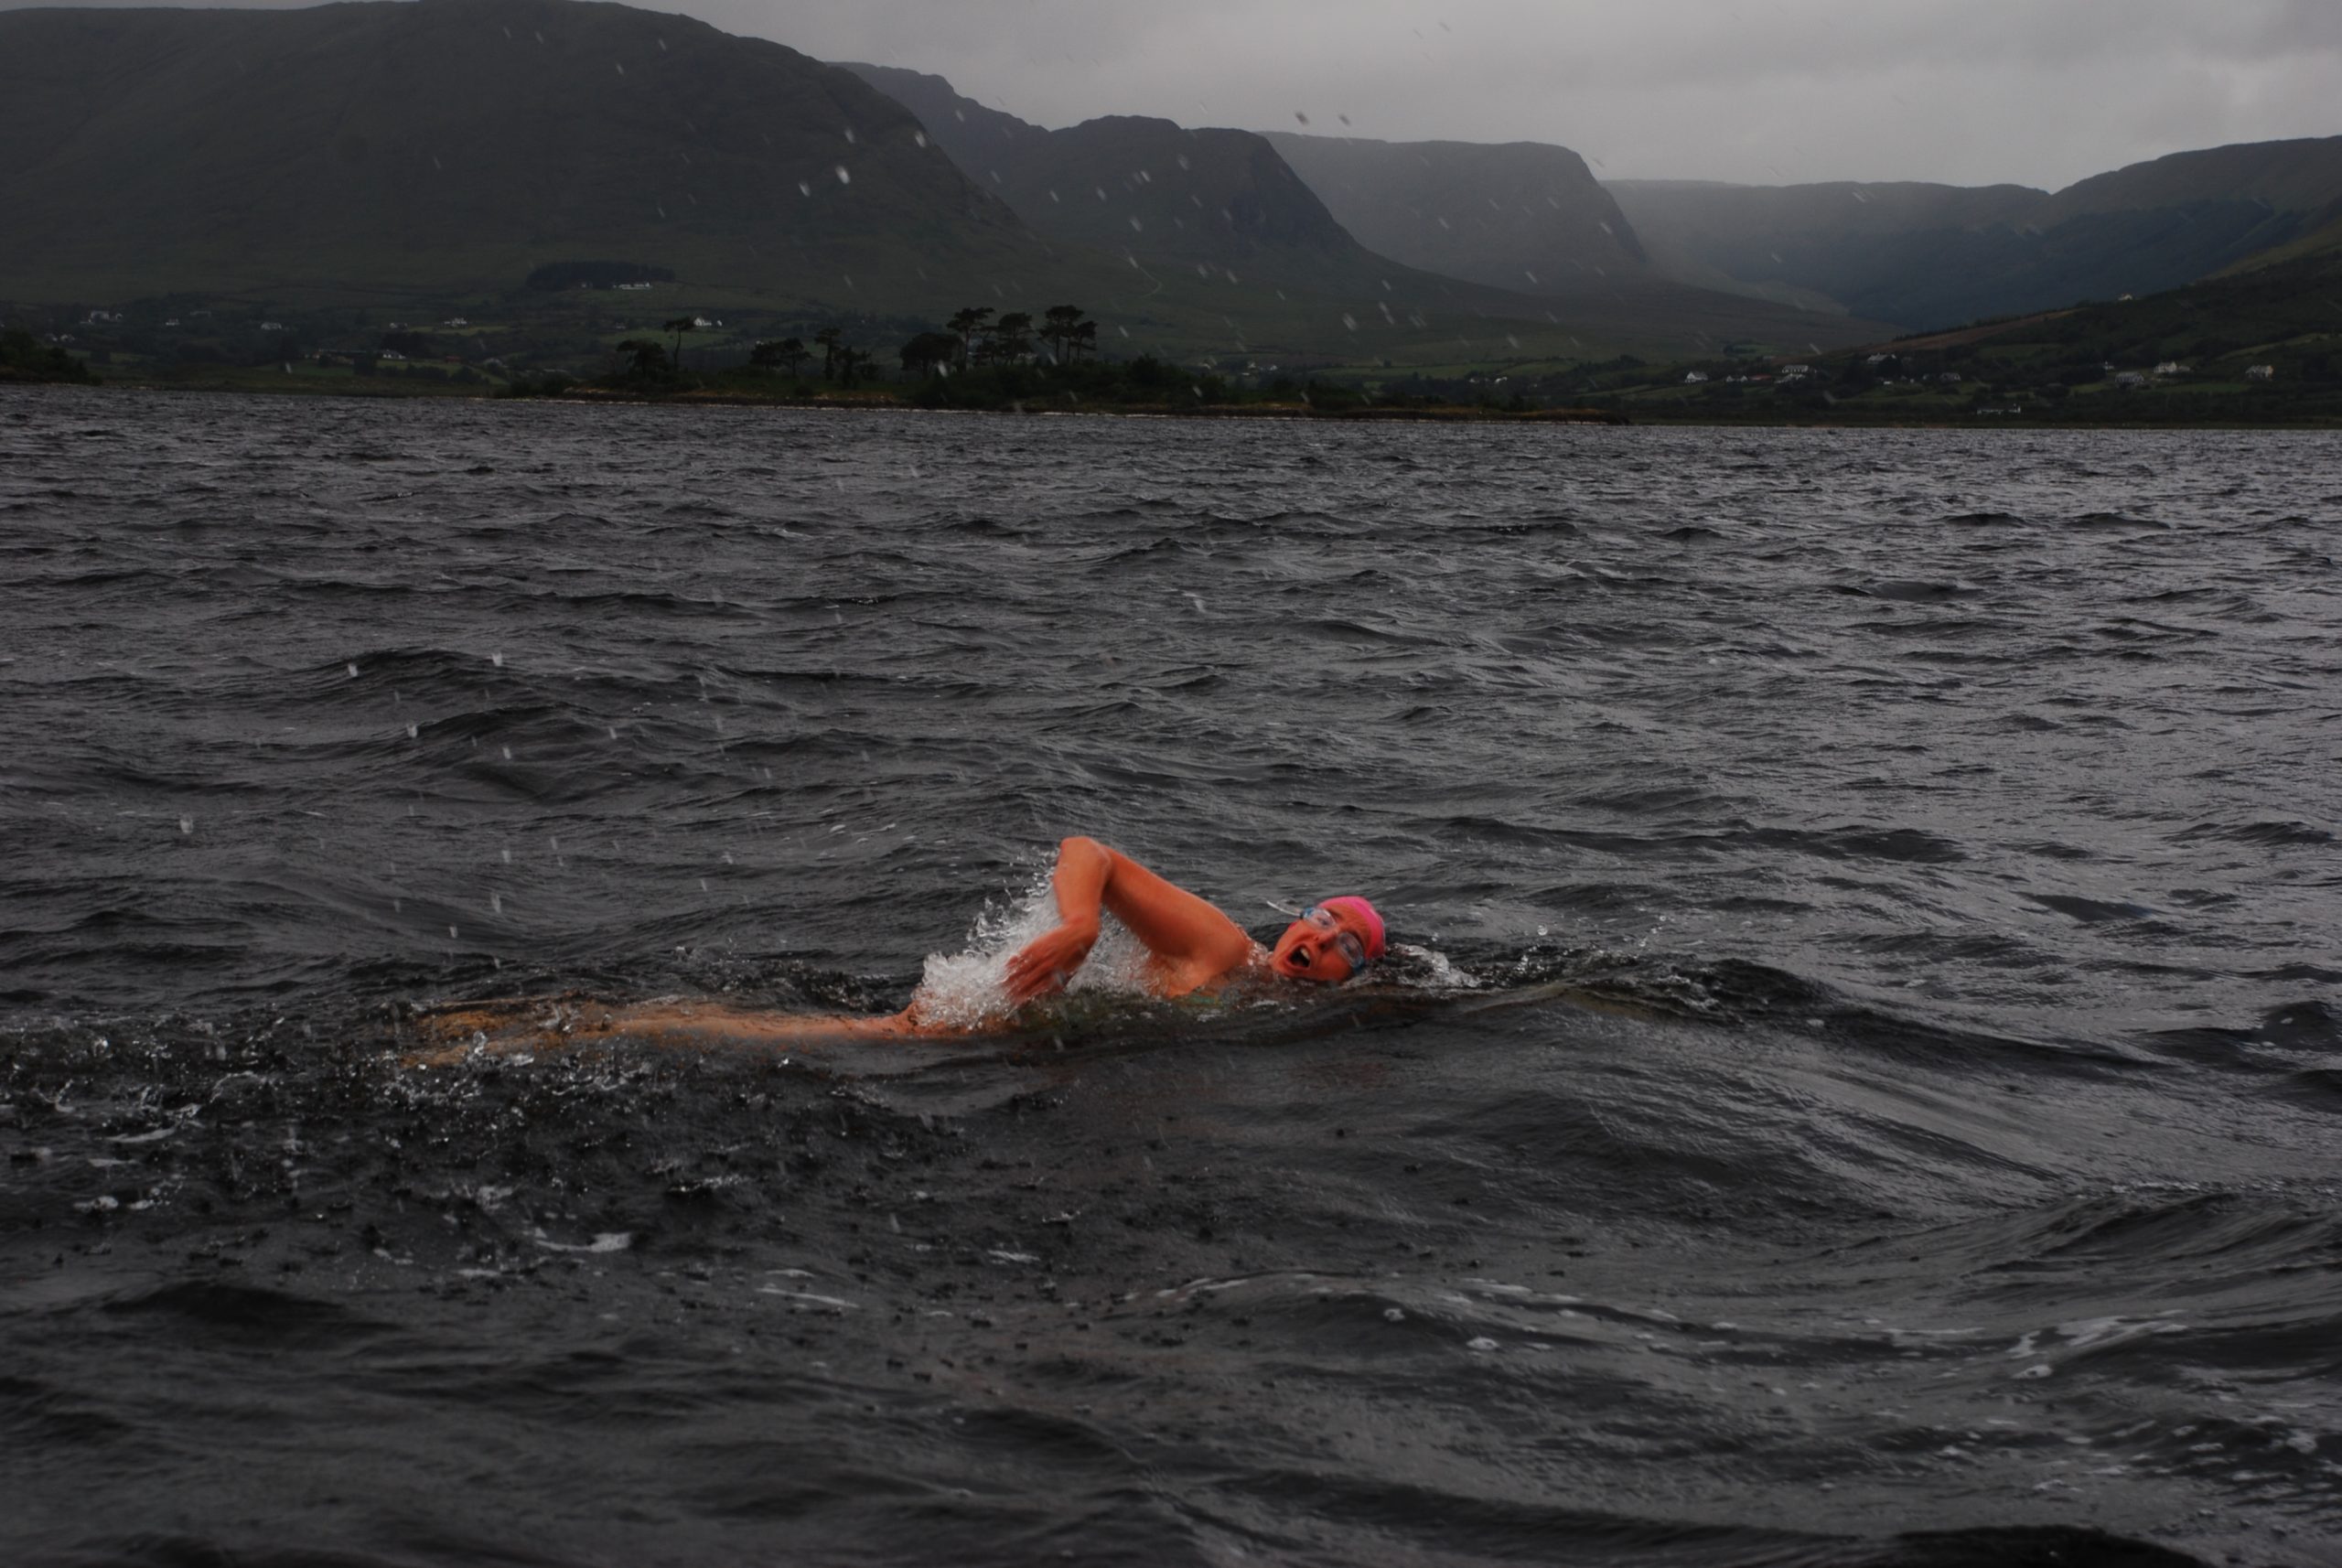 Vanessa Daws in Lough Mask. Photo by Padraig Canney